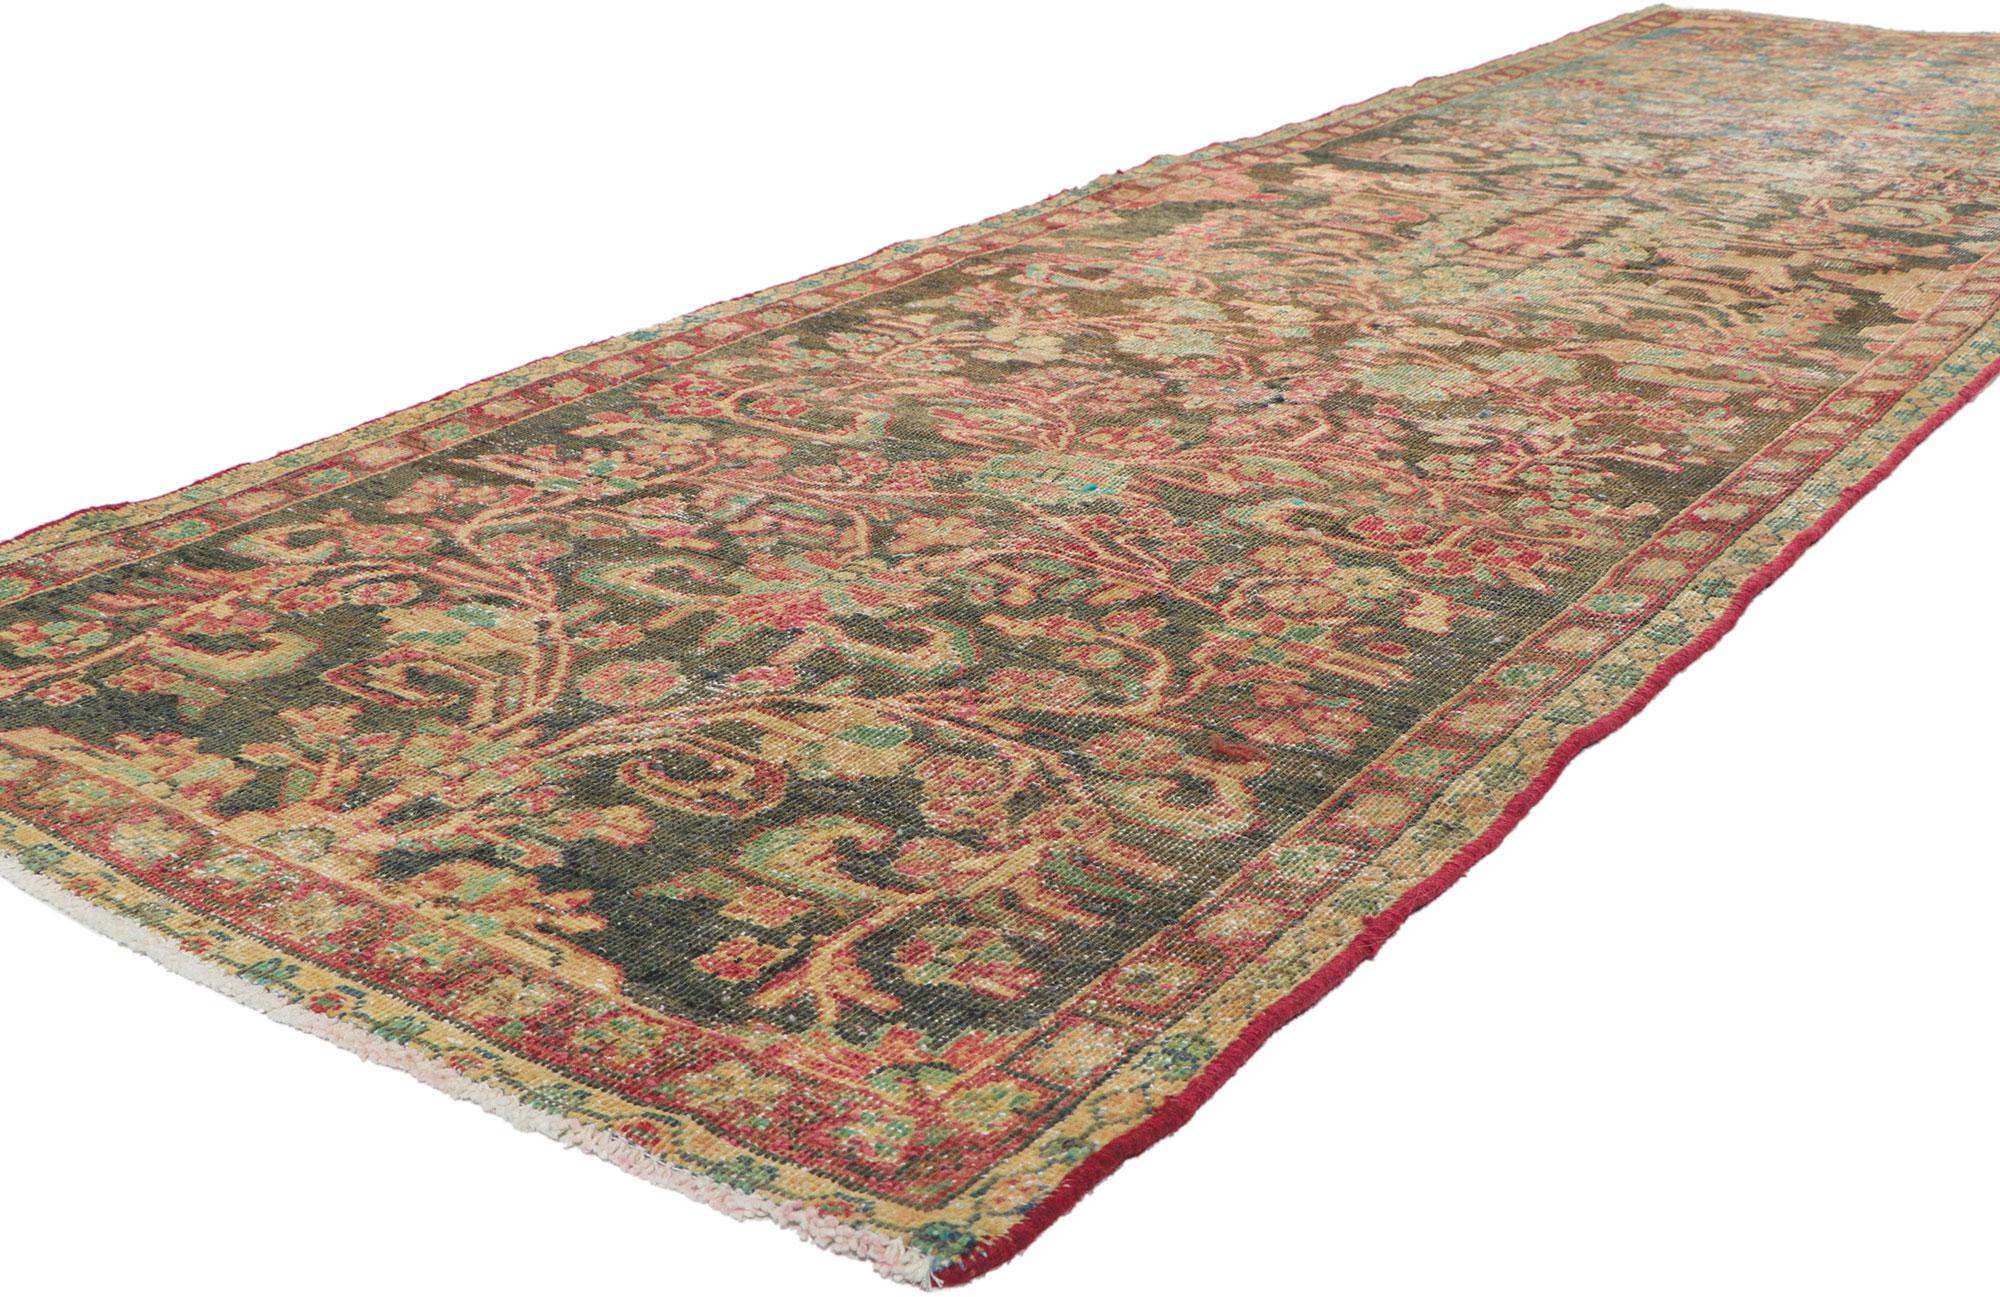 Vintage Persian mahal runner, measures: 03'06 x 12'09.
With its rugged beauty and rustic sensibility, this hand knotted wool distressed vintage ?Persian Mahal runner will take on a curated lived-in look that feels timeless while imparting a sense